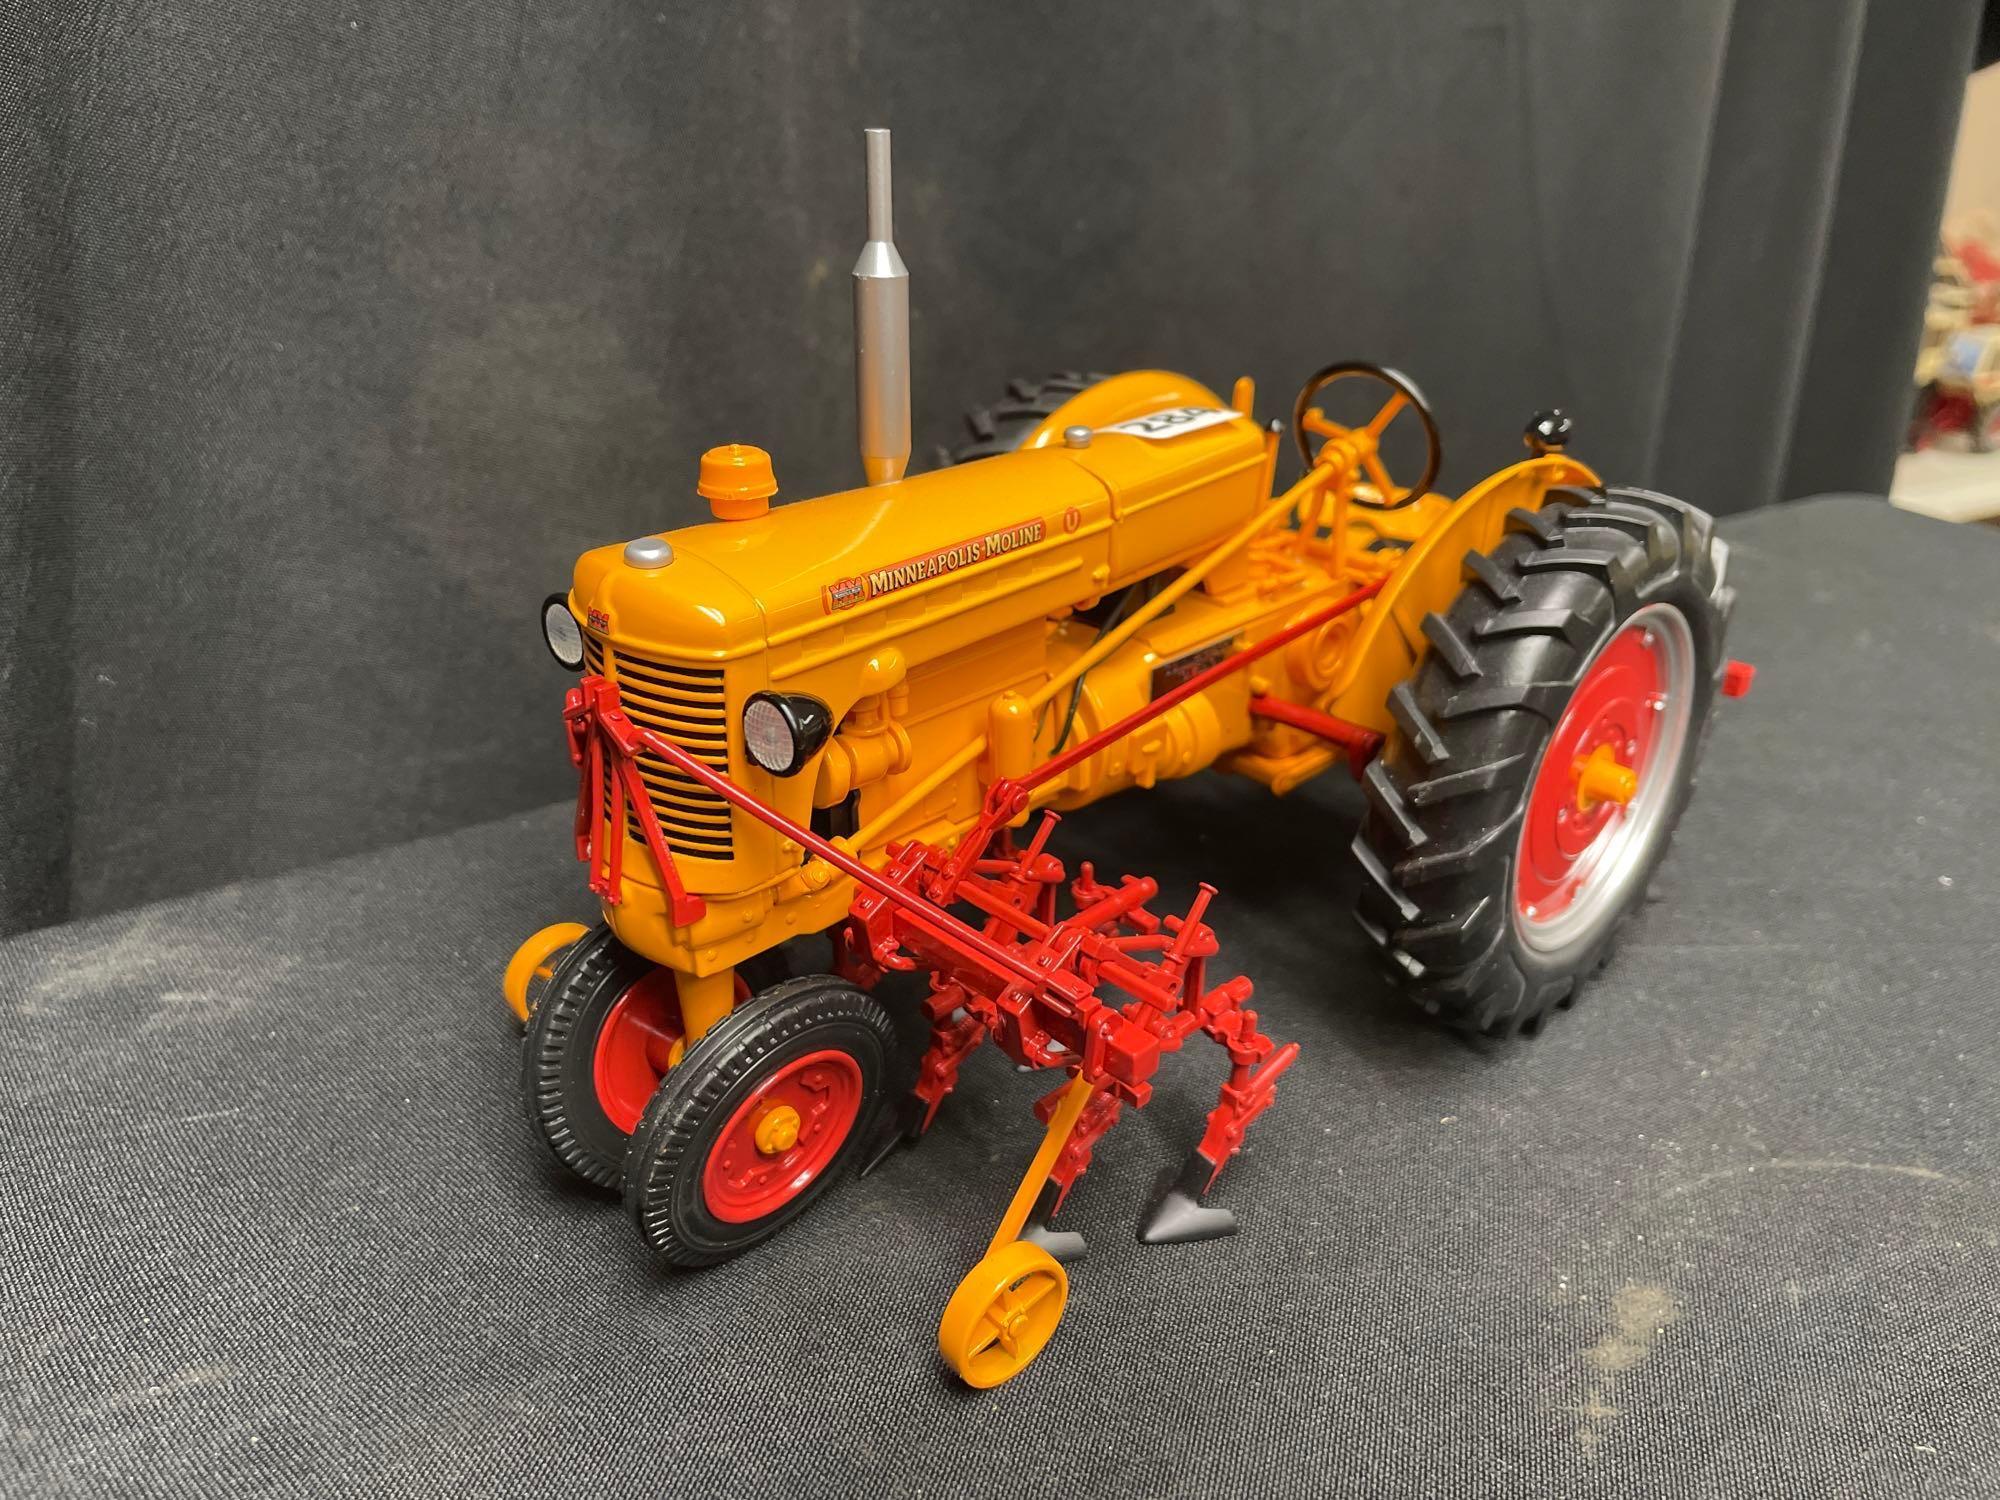 1/16th Scale 2010 Summer Farm Toy Show Minneapolis Moline Tractor w/front mount Cultivator